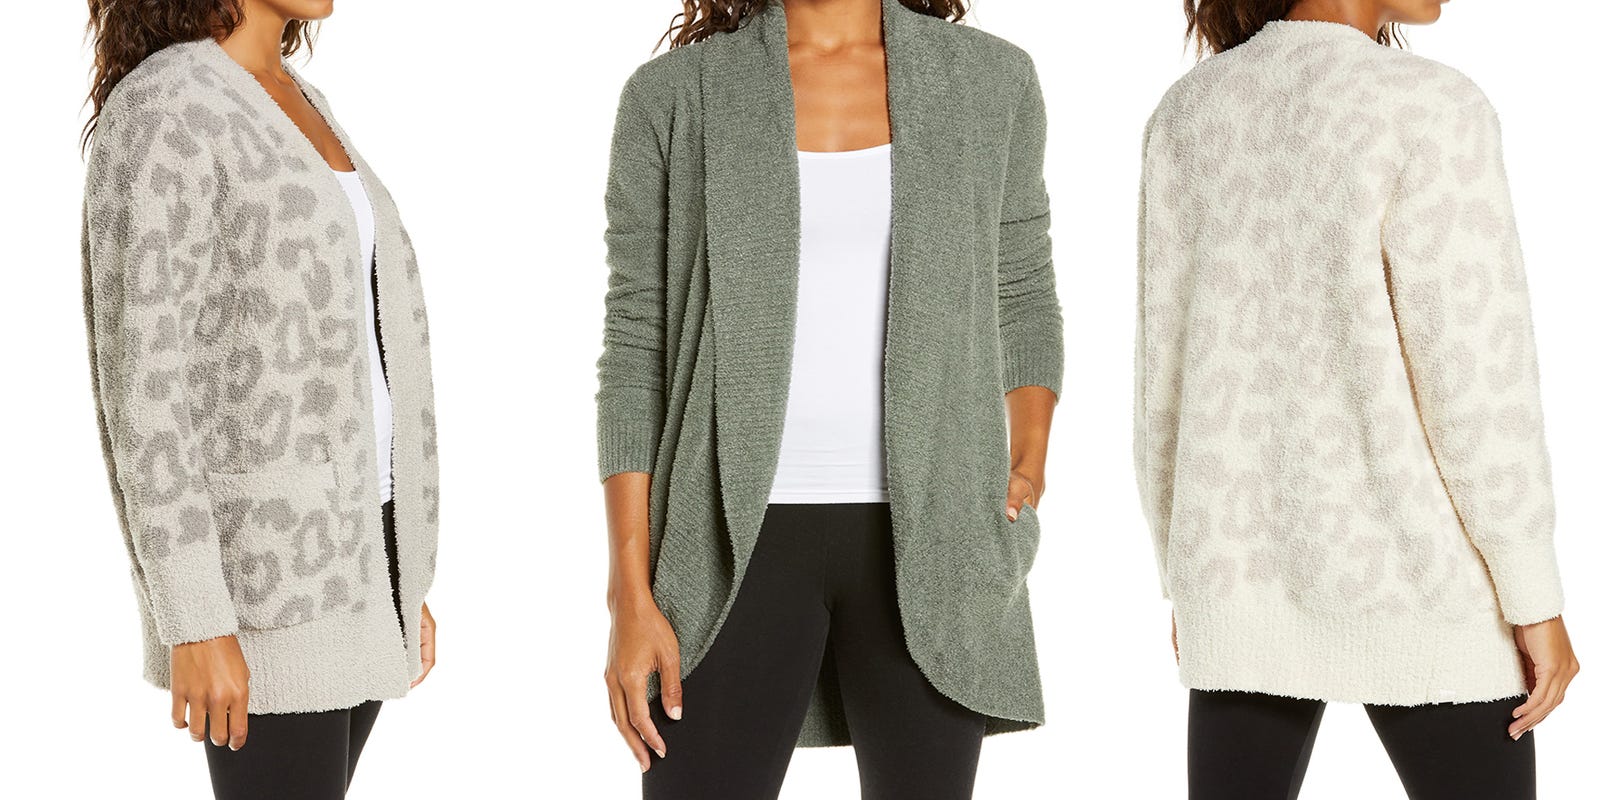 Nordstrom Anniversary Sale: Get this Barefoot Dreams cardigan on sale